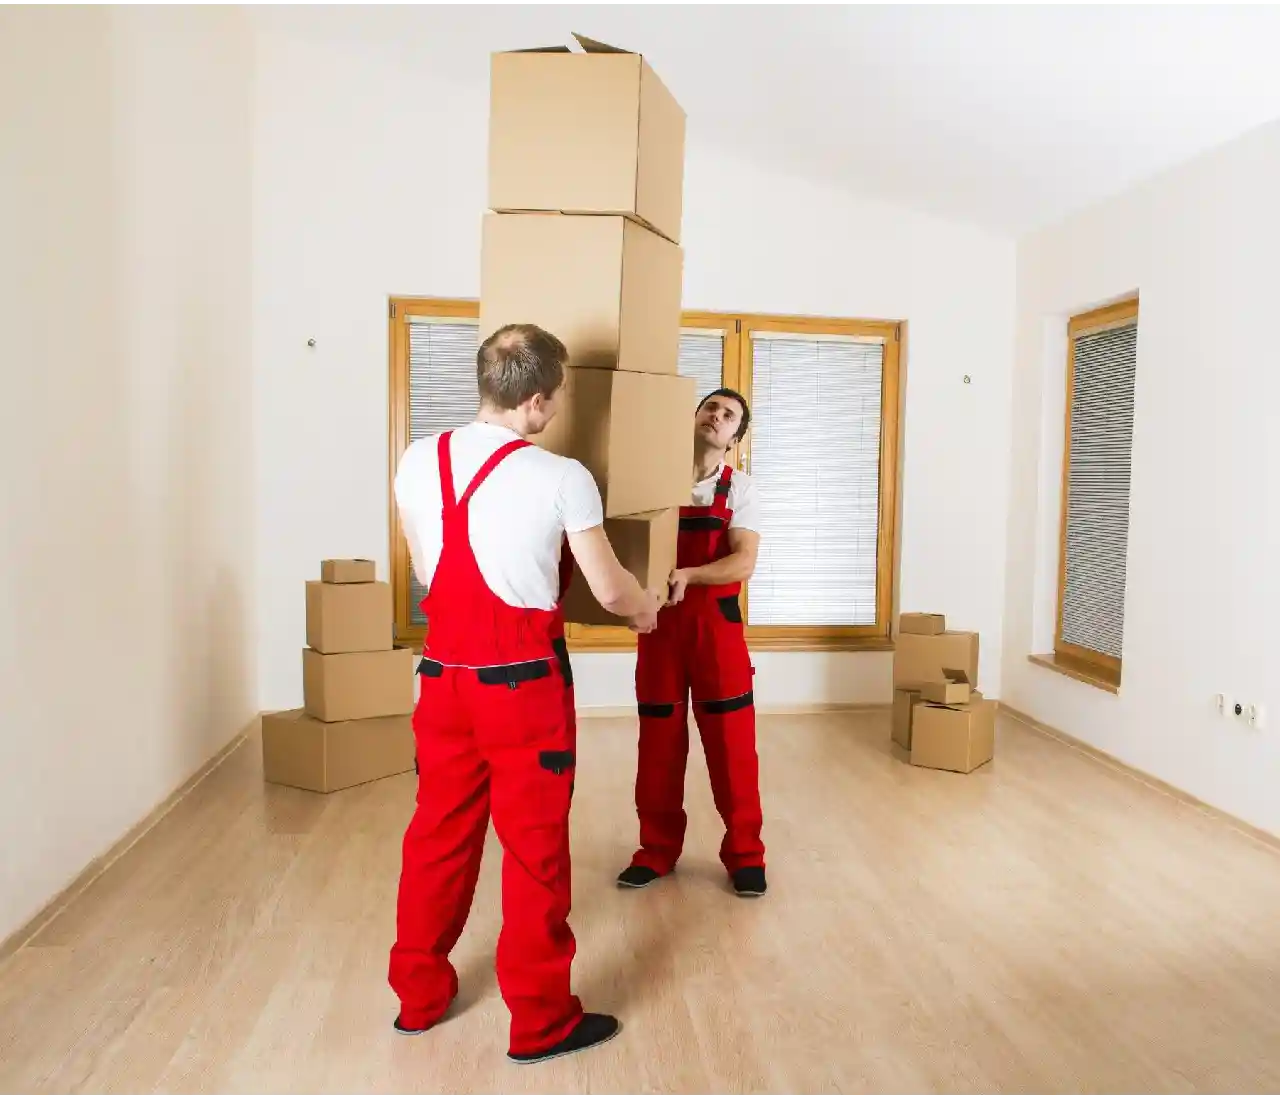 How Apartment Moving Companies Can Make Your Move Seamless From Packing to Unpacking